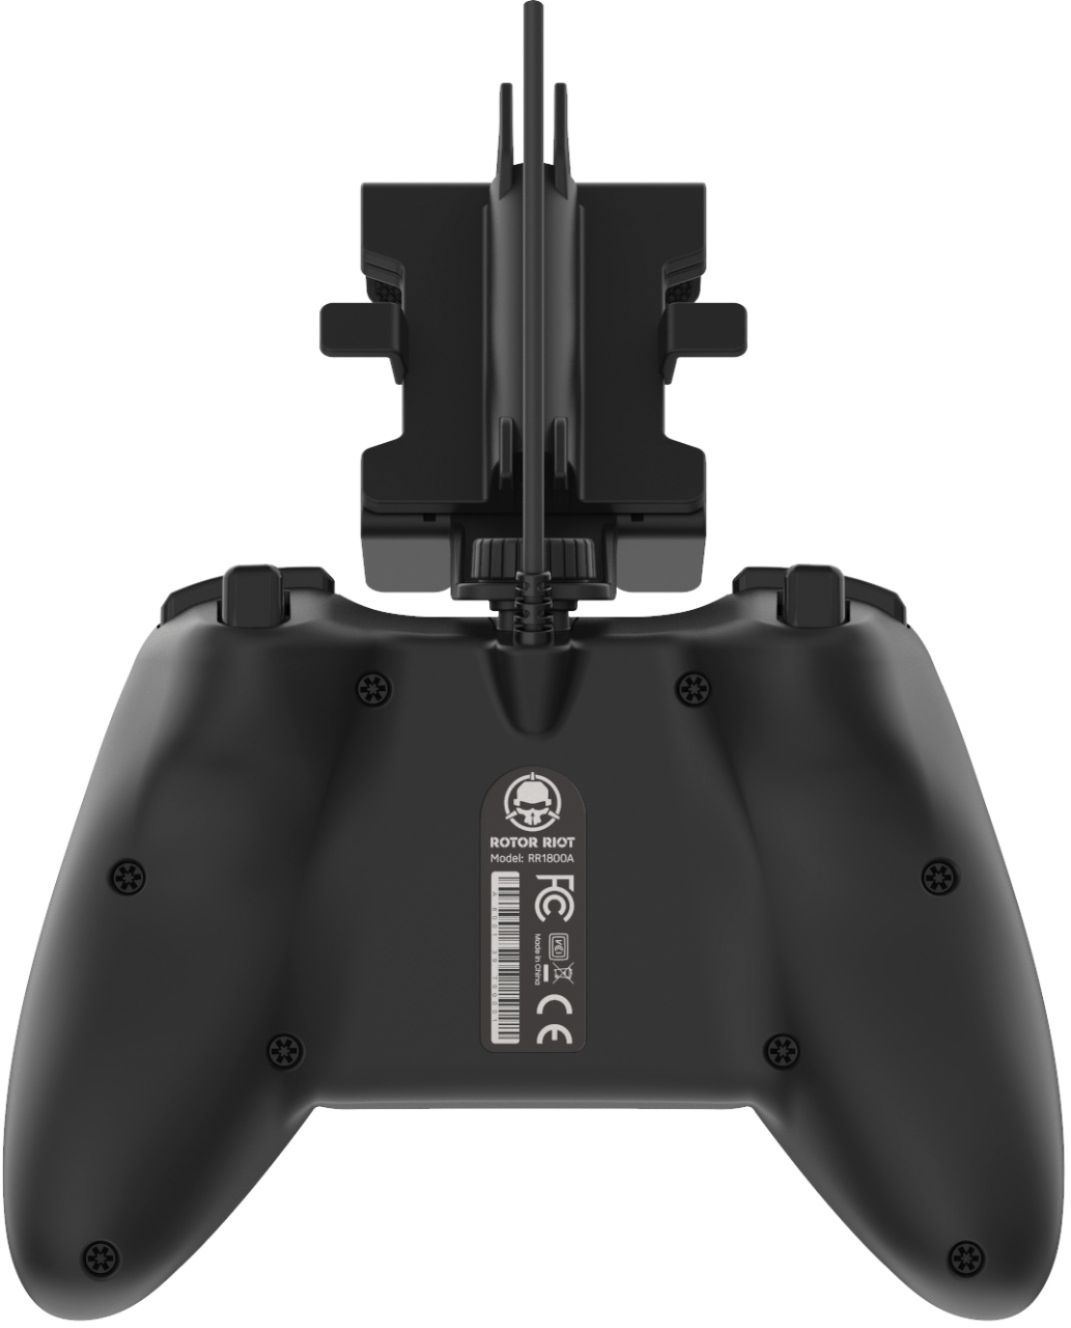 Back View: Rotor Riot RR1800A, Drone Controller, Video Game accessory for Android Devices, with L3 + R3 Compatibility, Black